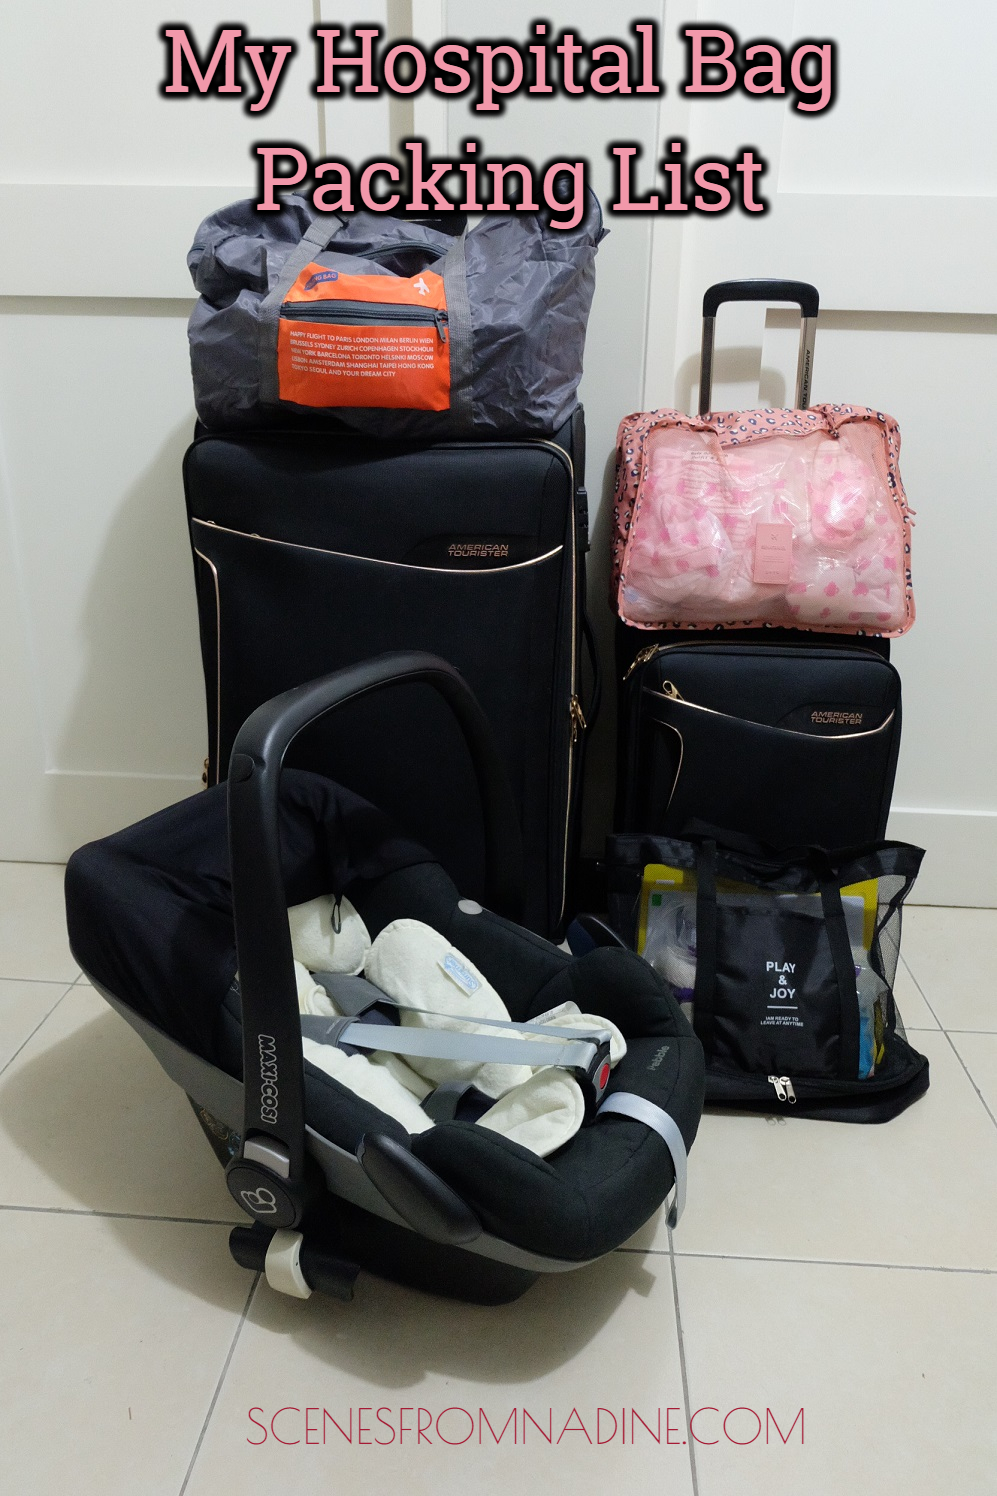 What We Packed in Our Baby Hospital Bag